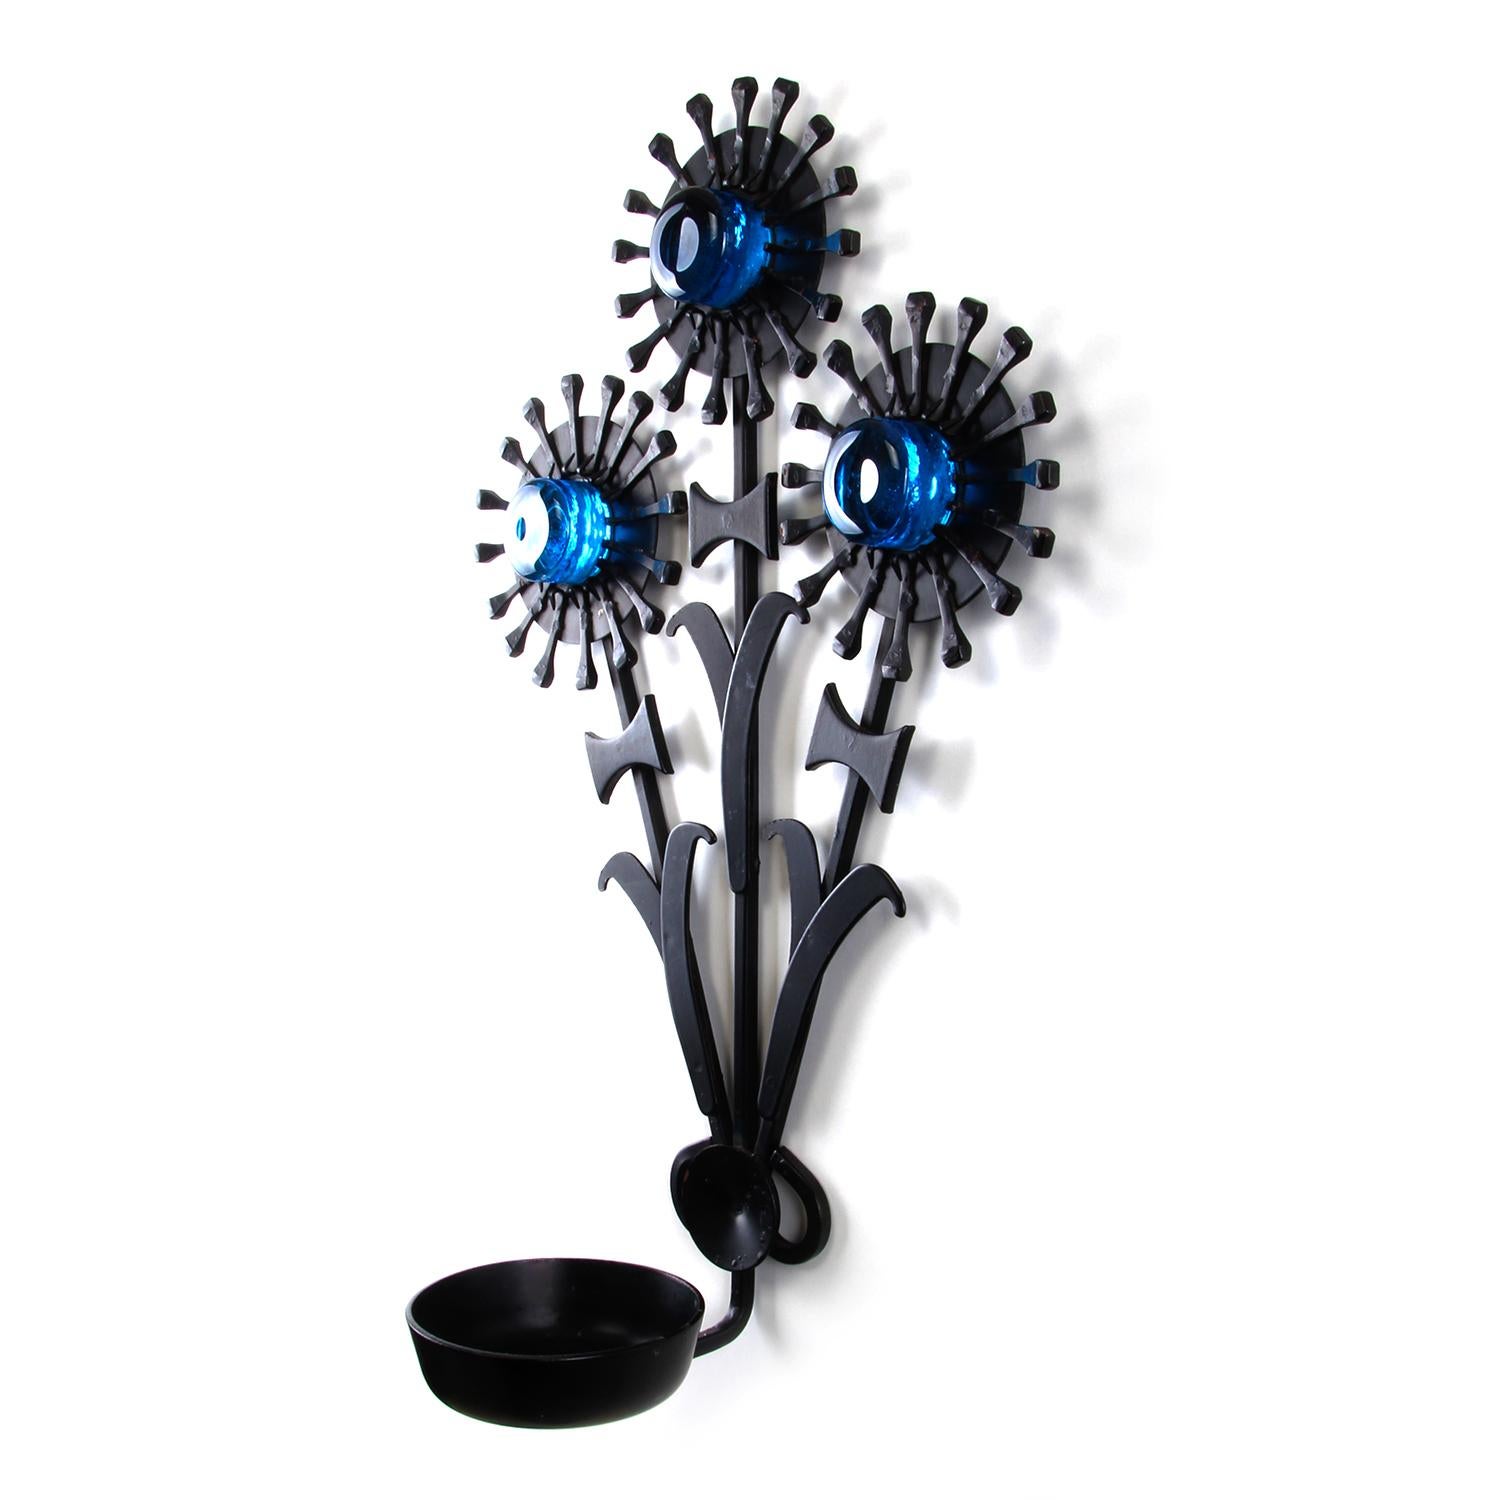 Welded Sconce Black Iron Candleholder with Blue Glass by Danish Dantoft, 1960s For Sale